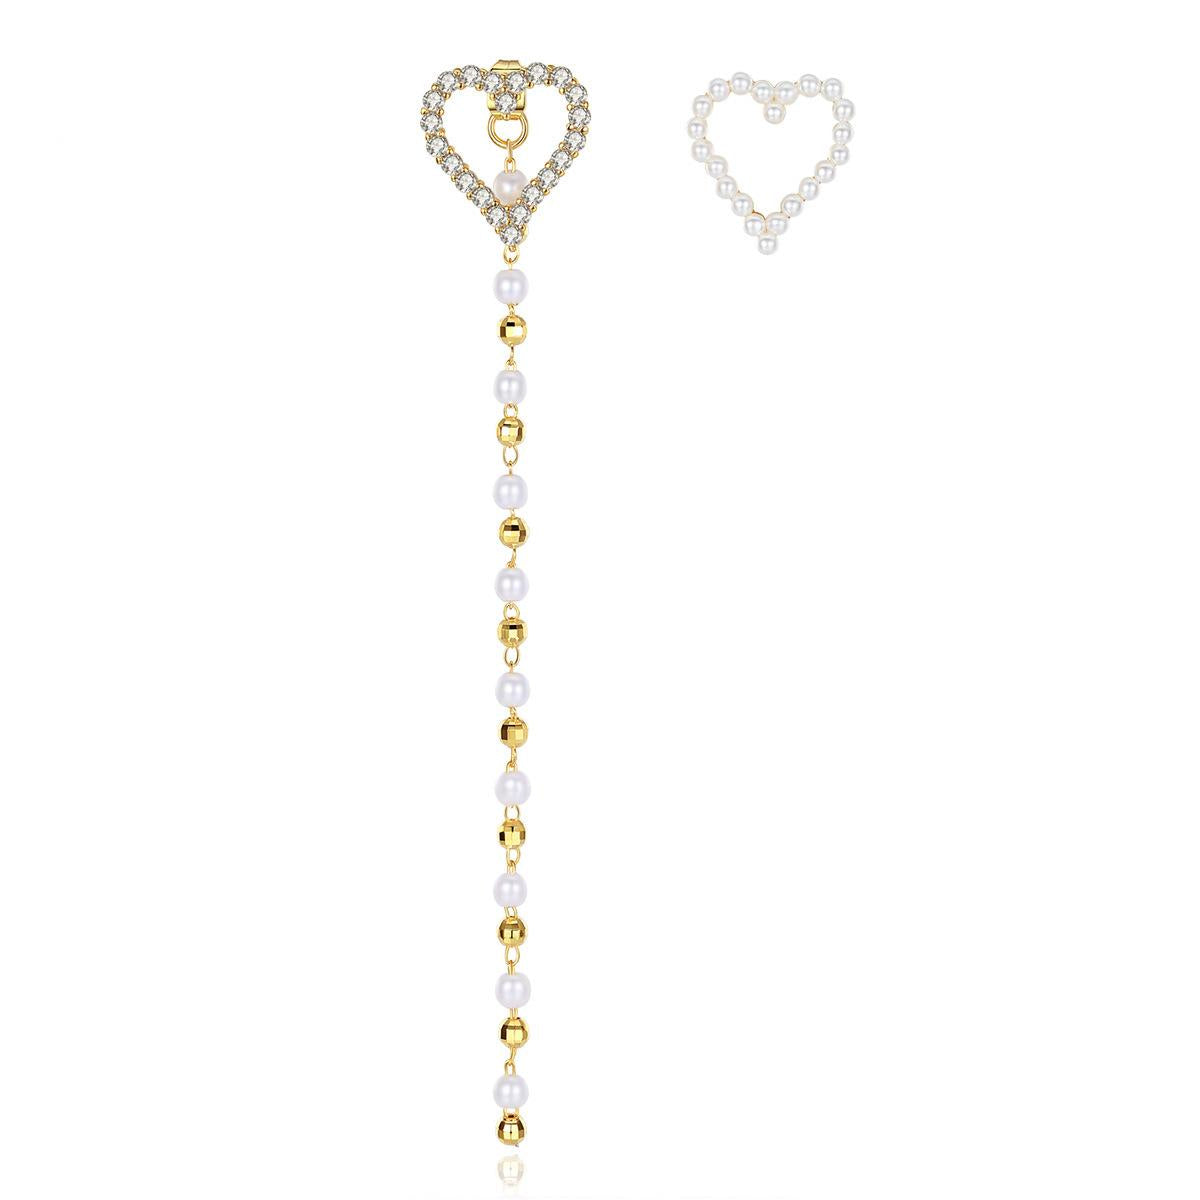 Pearl & Cubic Zirconia 18K Gold-Plated Heart Mismatched Earrings